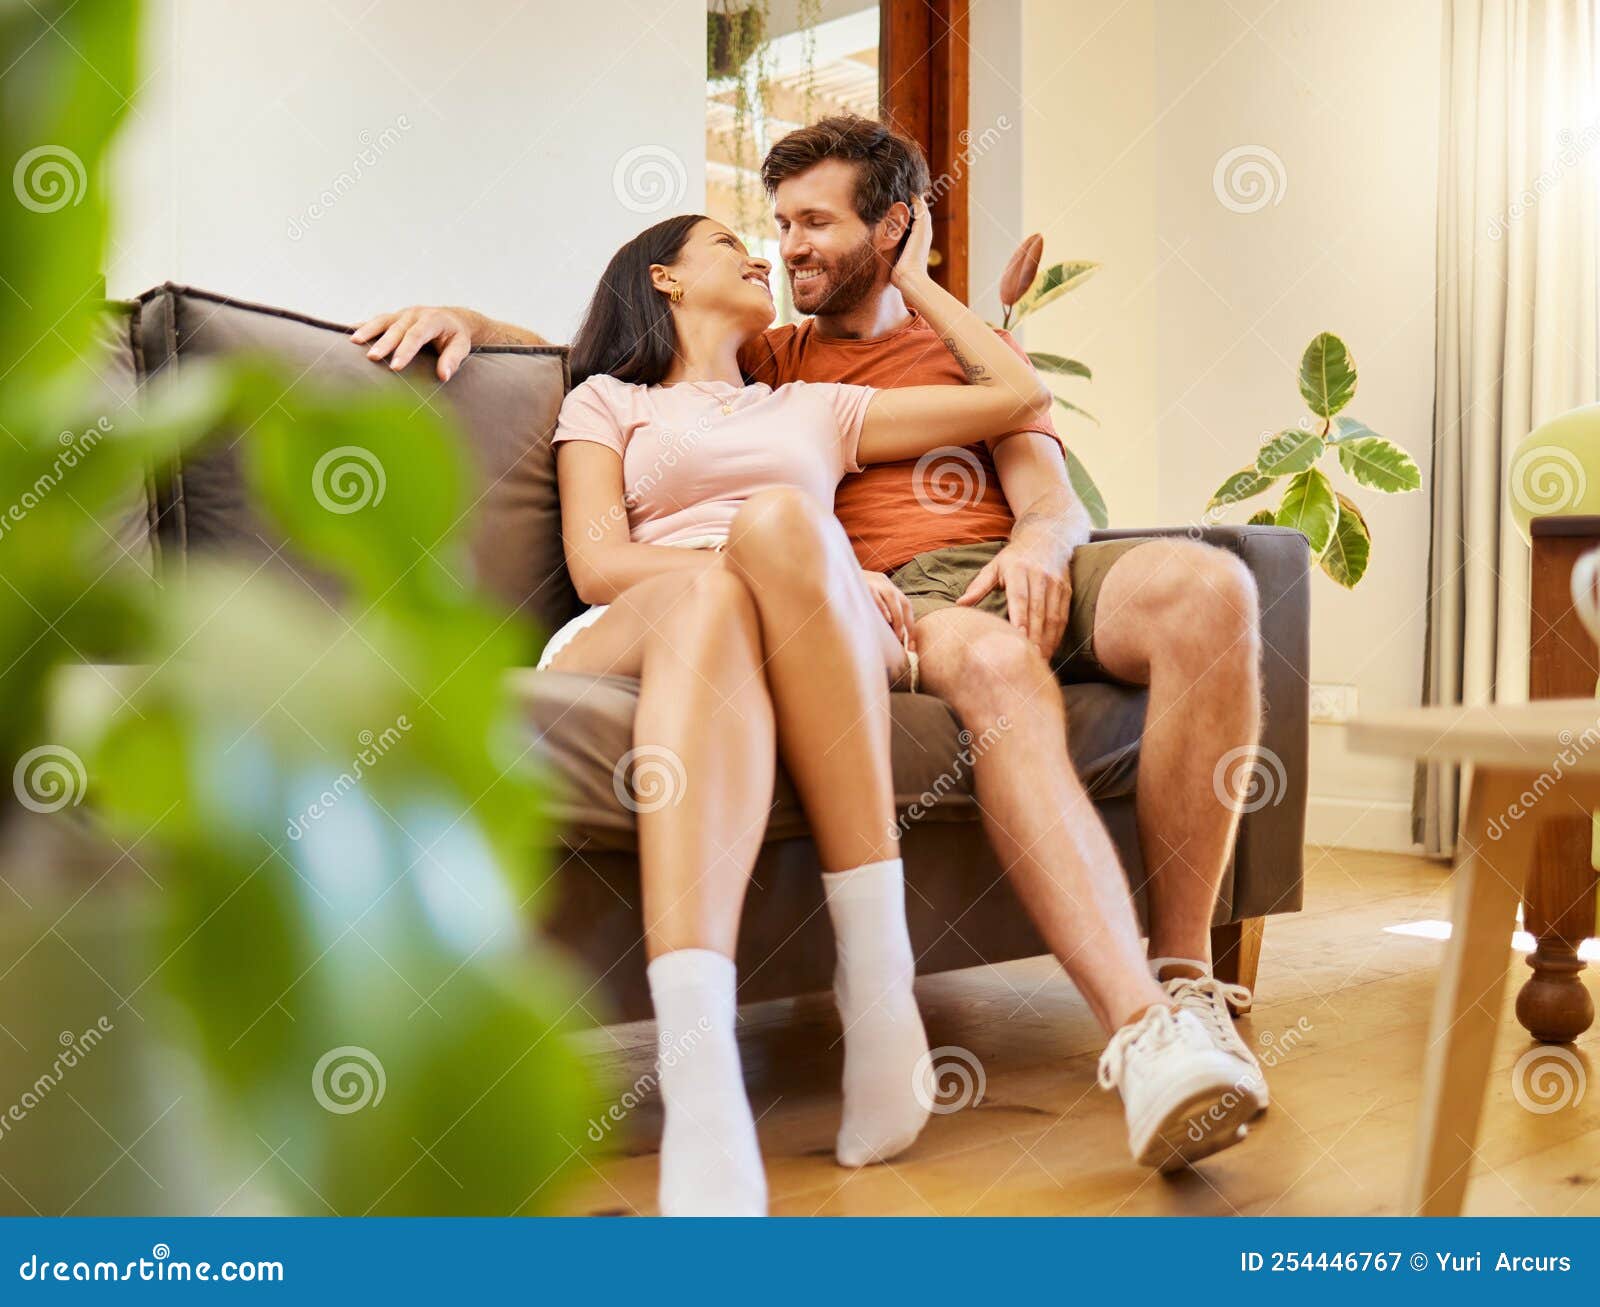 Happy, Romance and Couple Relax Indoors Together, Bonding and Talking on Sofa Together image